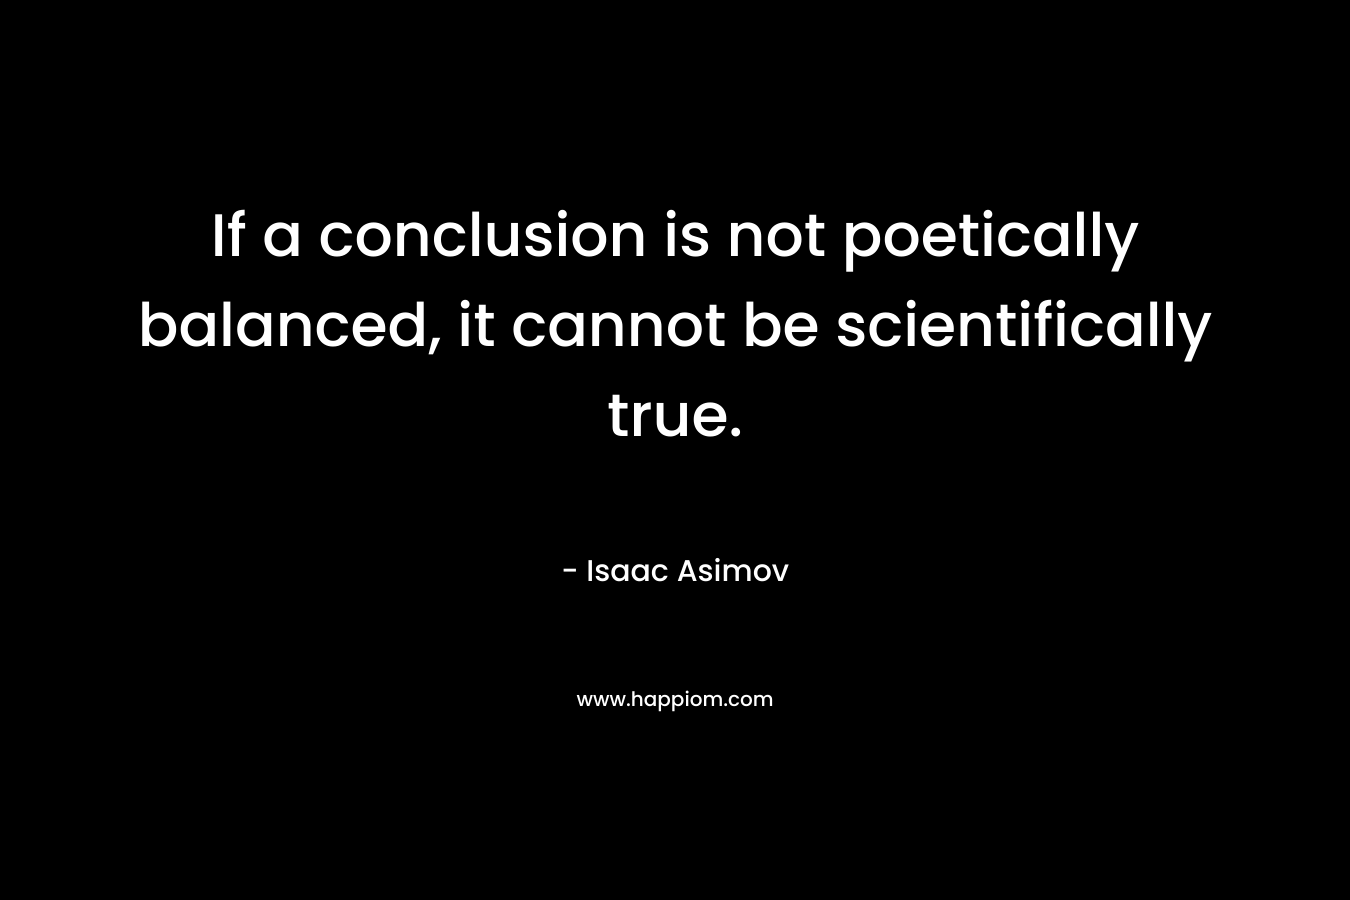 If a conclusion is not poetically balanced, it cannot be scientifically true.